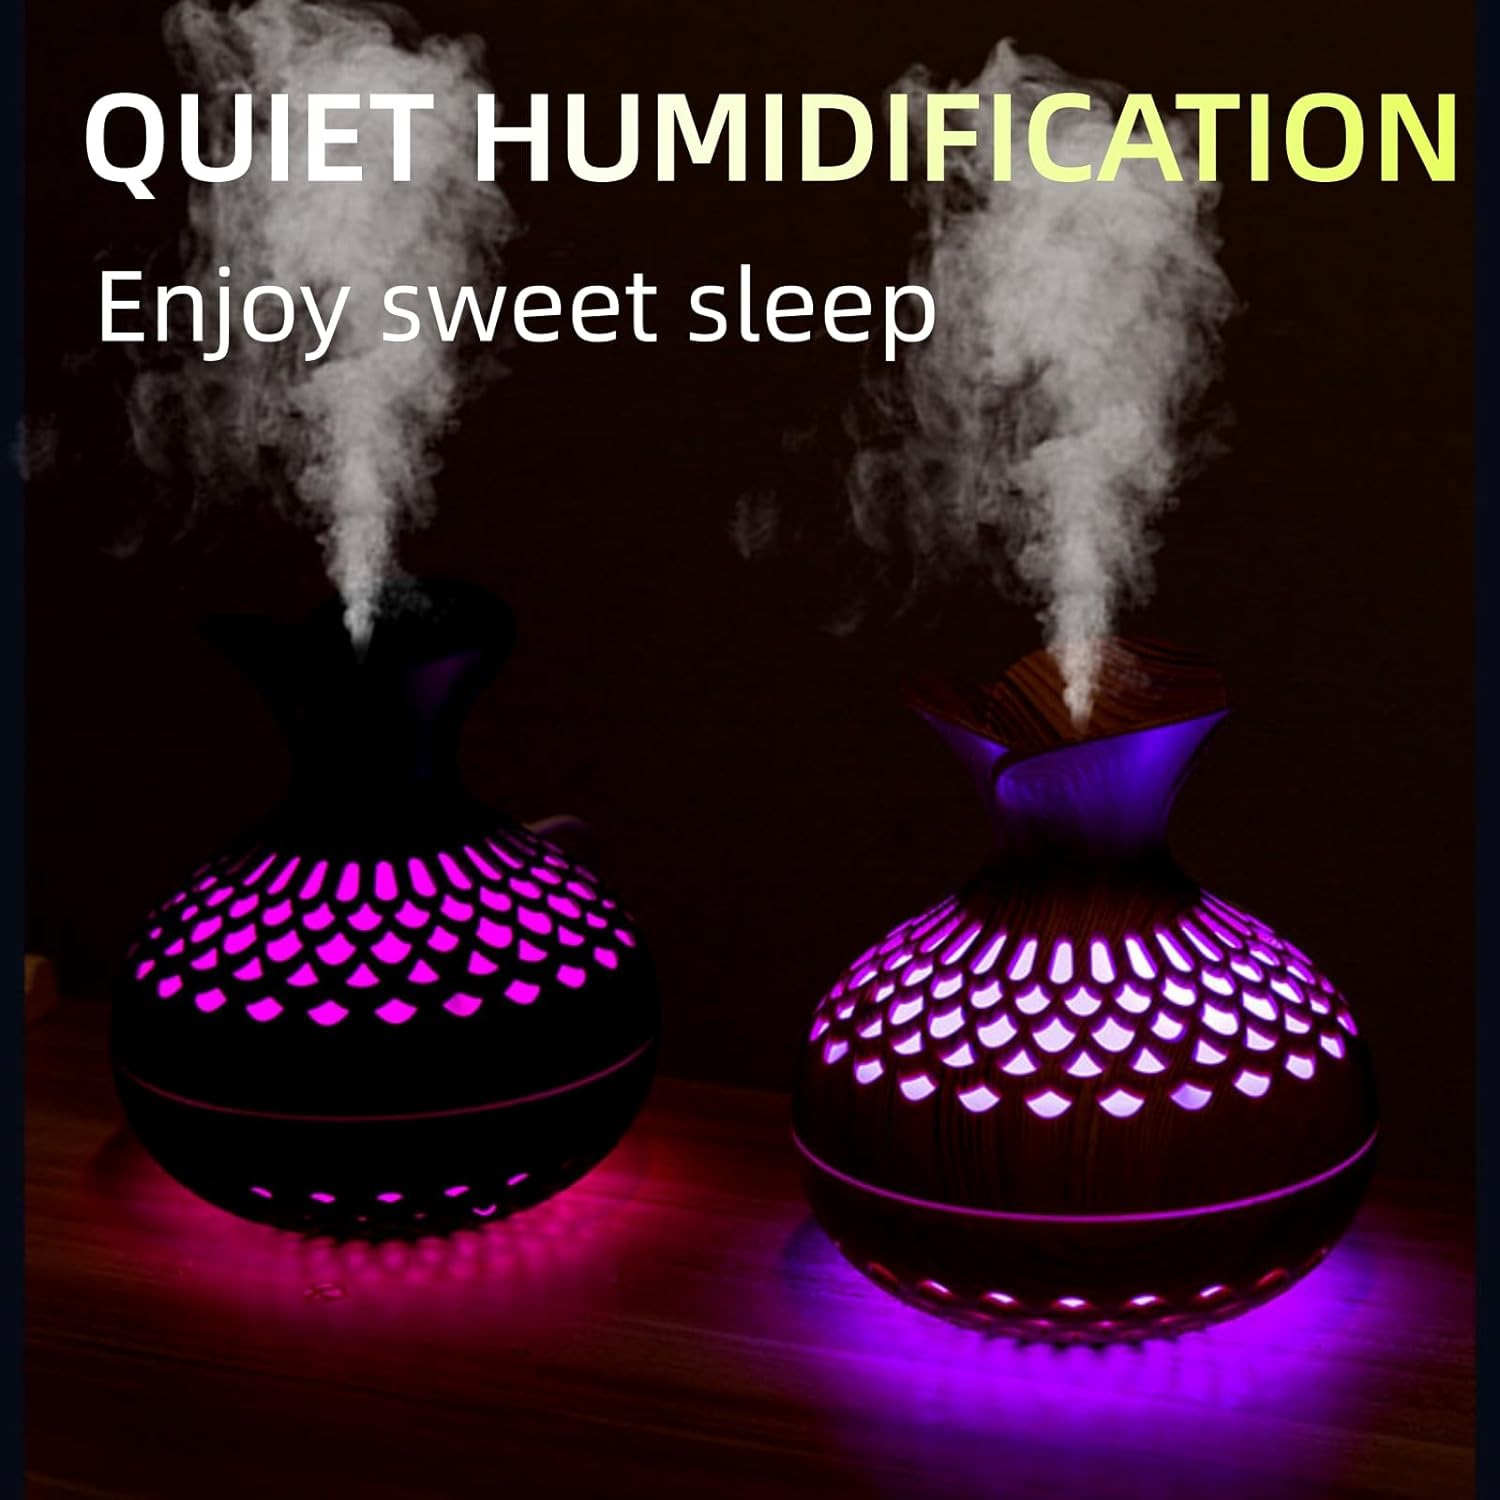 Colorful Cool Mini Humidifier, Flower Shape Humidifier,USB Personal Desktop Humidifier for Car, Office Room, Bedroom,etc. 2 Mist Modes, 7 colors,Super Quiet (Darkwood)